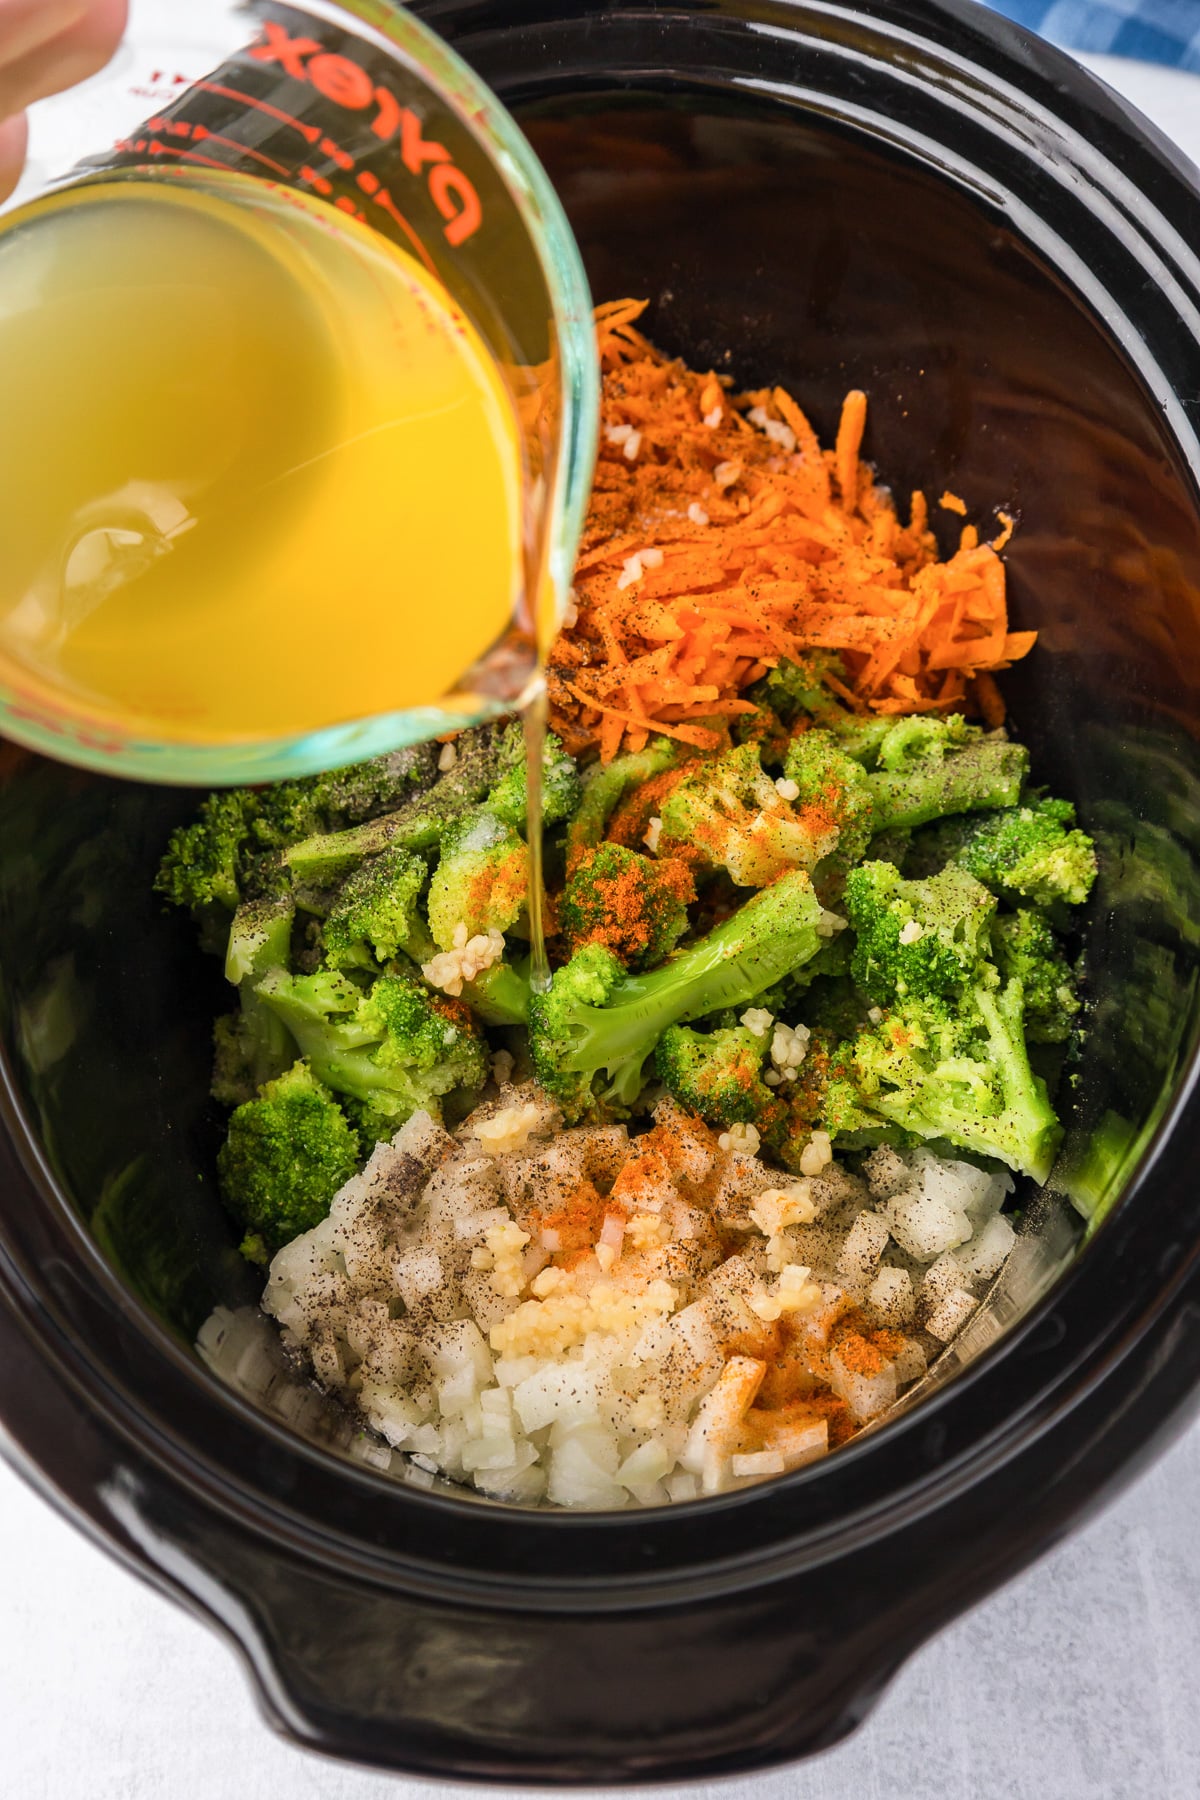 A person pouring broth into a crock pot with broccoli, carrots and other vegetables and spices for broccoli cheese soup.